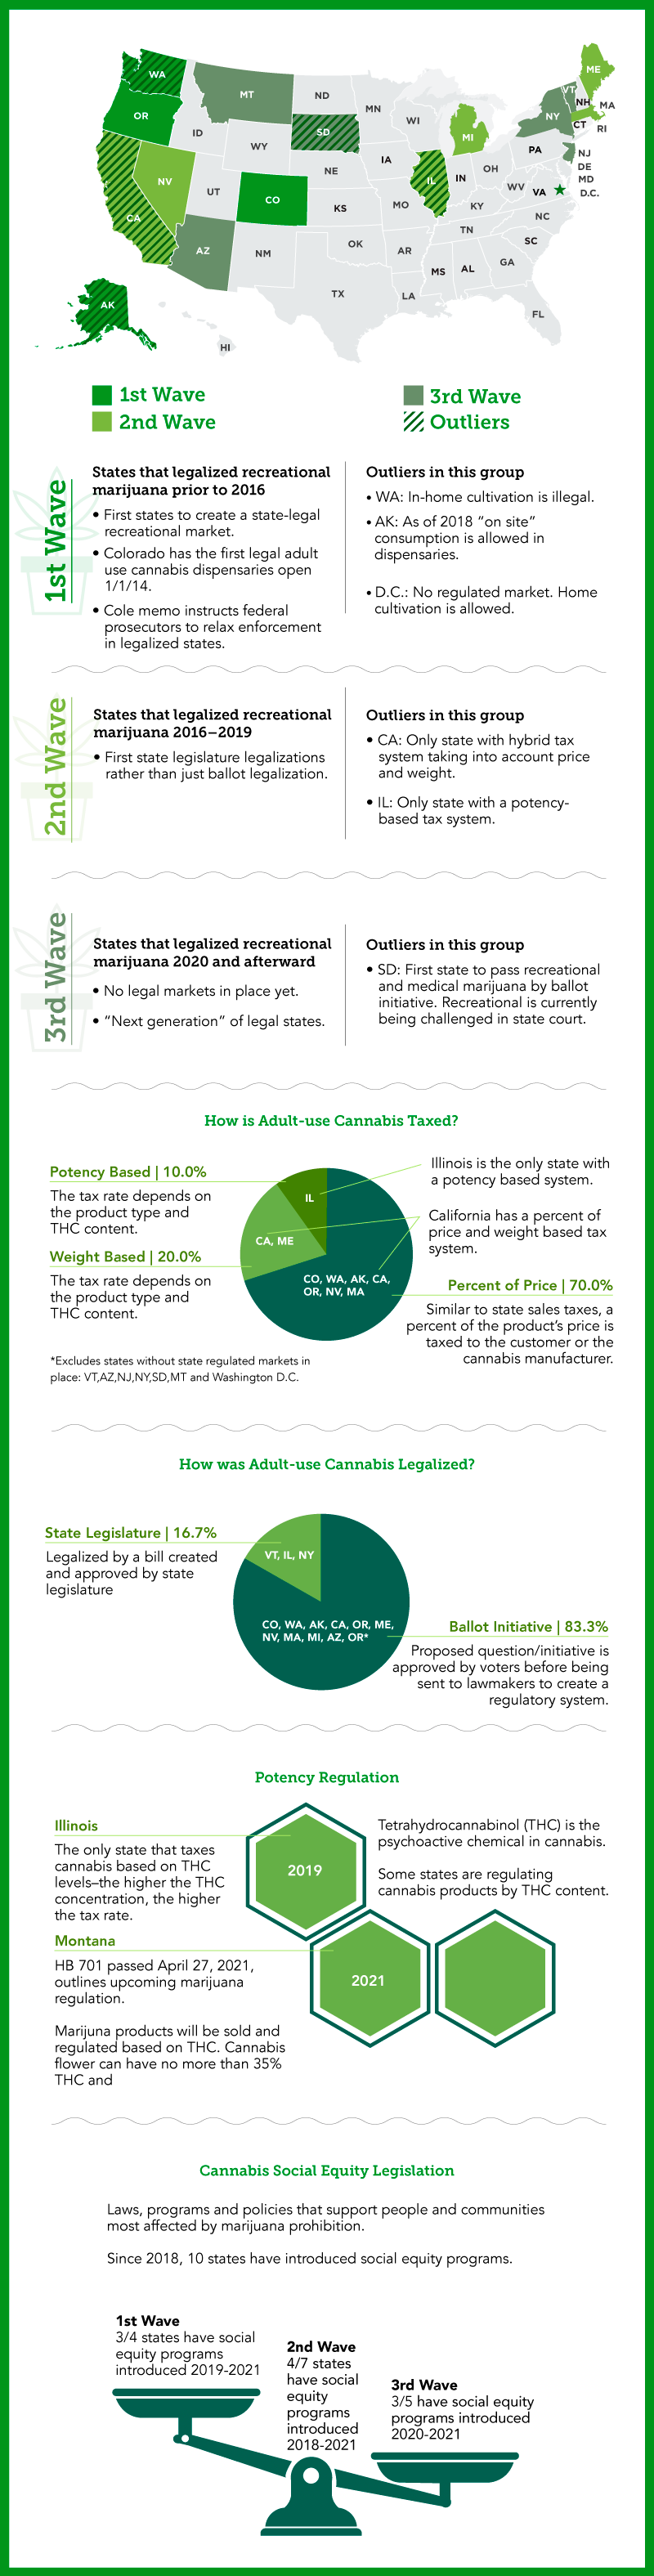 An infographic detailing marijuana laws around the country and providing information on how states went about legalizing cannabis, how it is taxed, how it is regulated and whether there is social equity legislation.